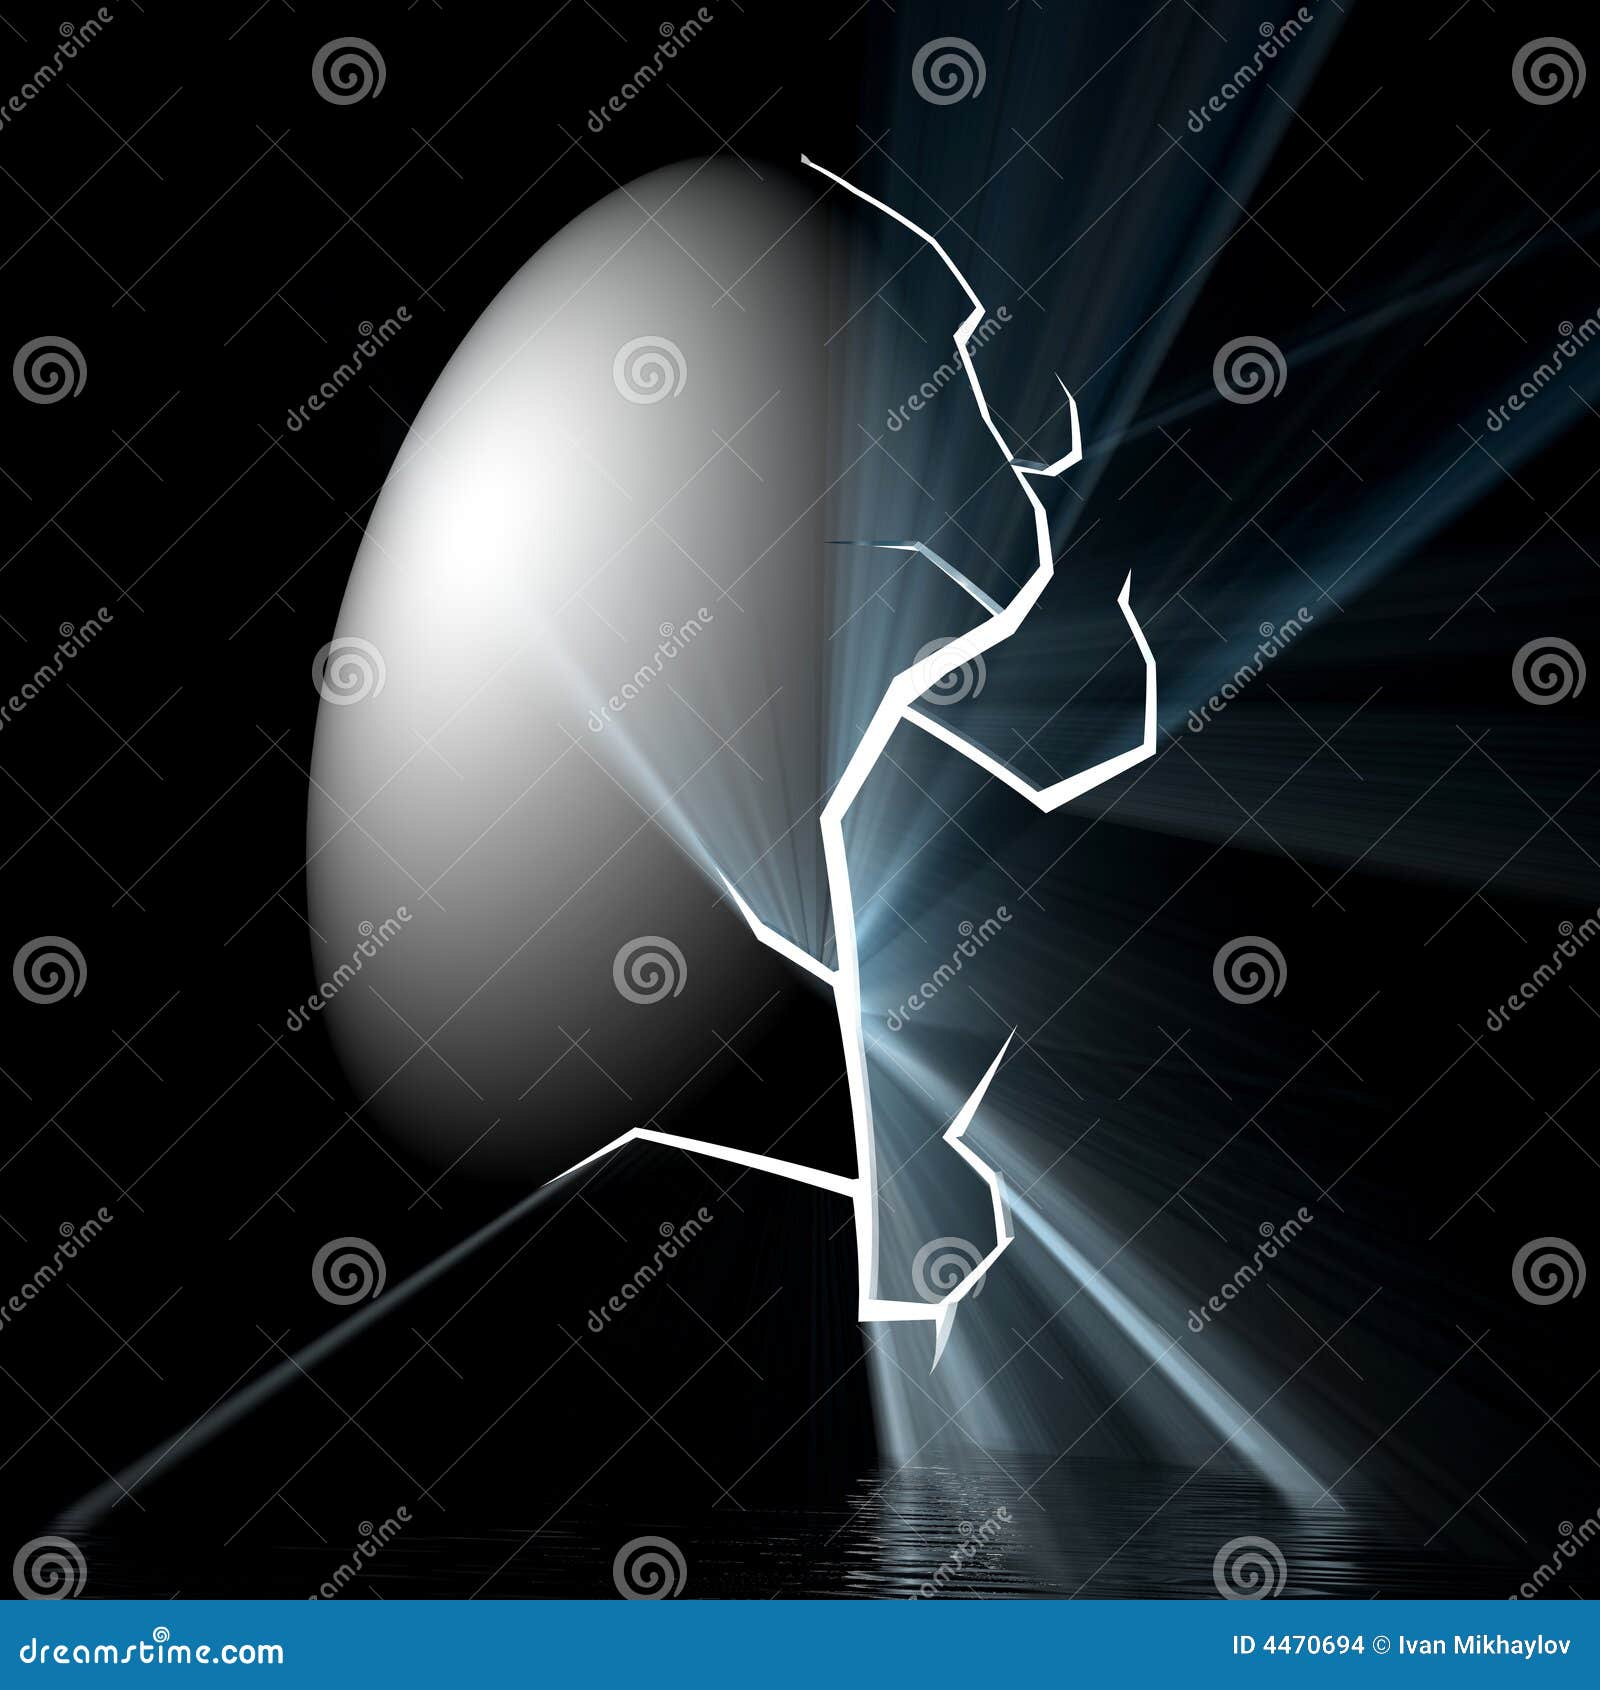 Modern And Creative Abstract 3D Cracked Wall Background For